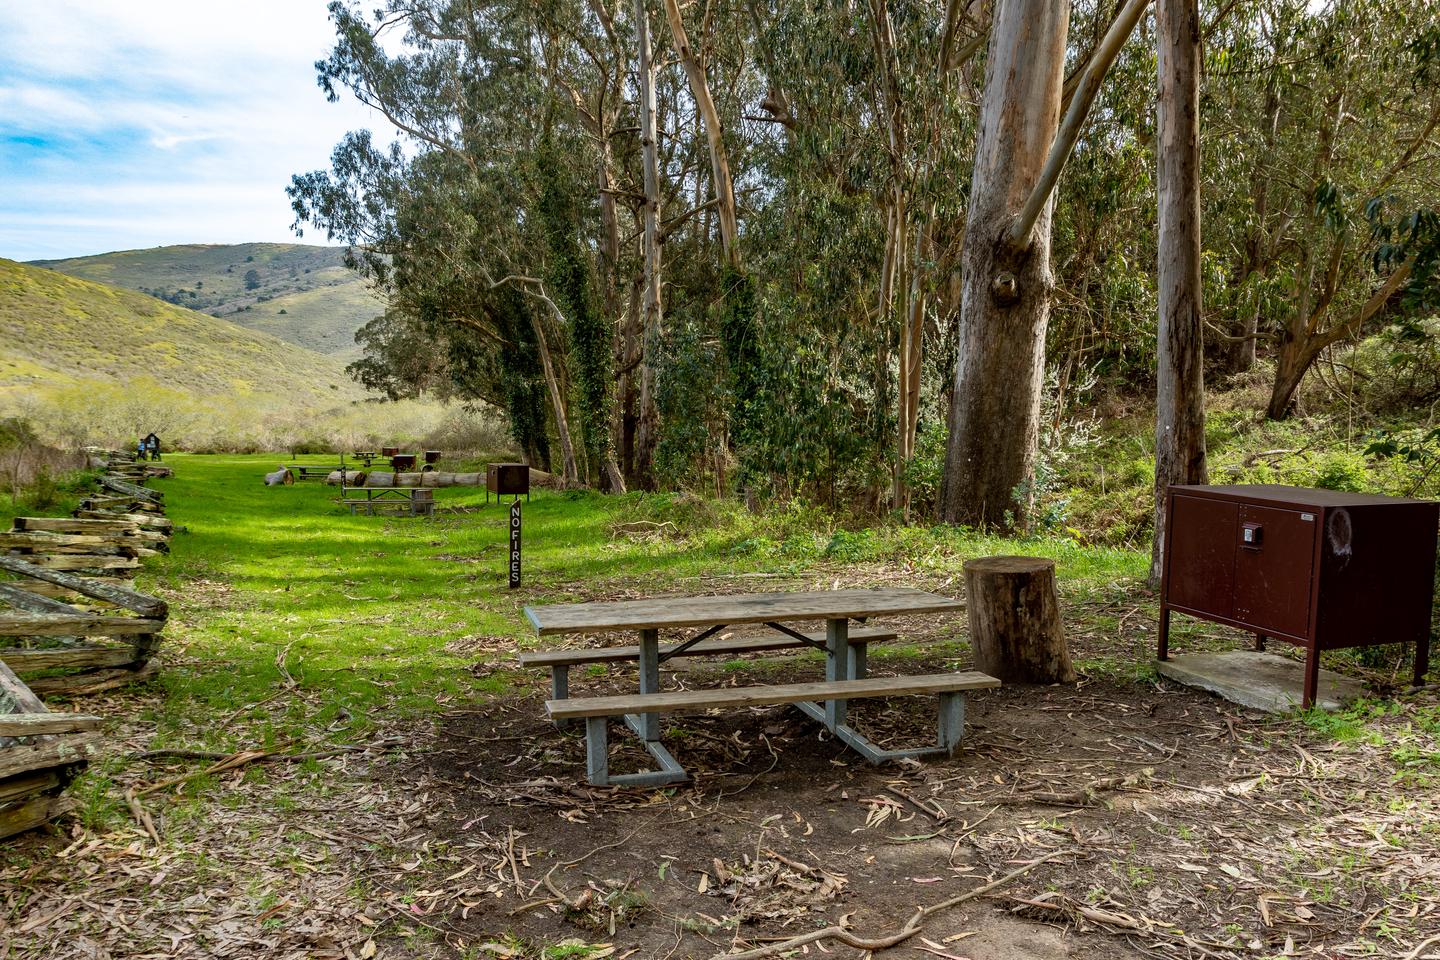 Picnic table, tree stump, and bear locker in a dirt patch surrounded by grass. The campsite post reads, "No fires" on its side. In the distance are the other campsites, eucalyptus trees and rolling hills.Site 5 of Haypress Campground